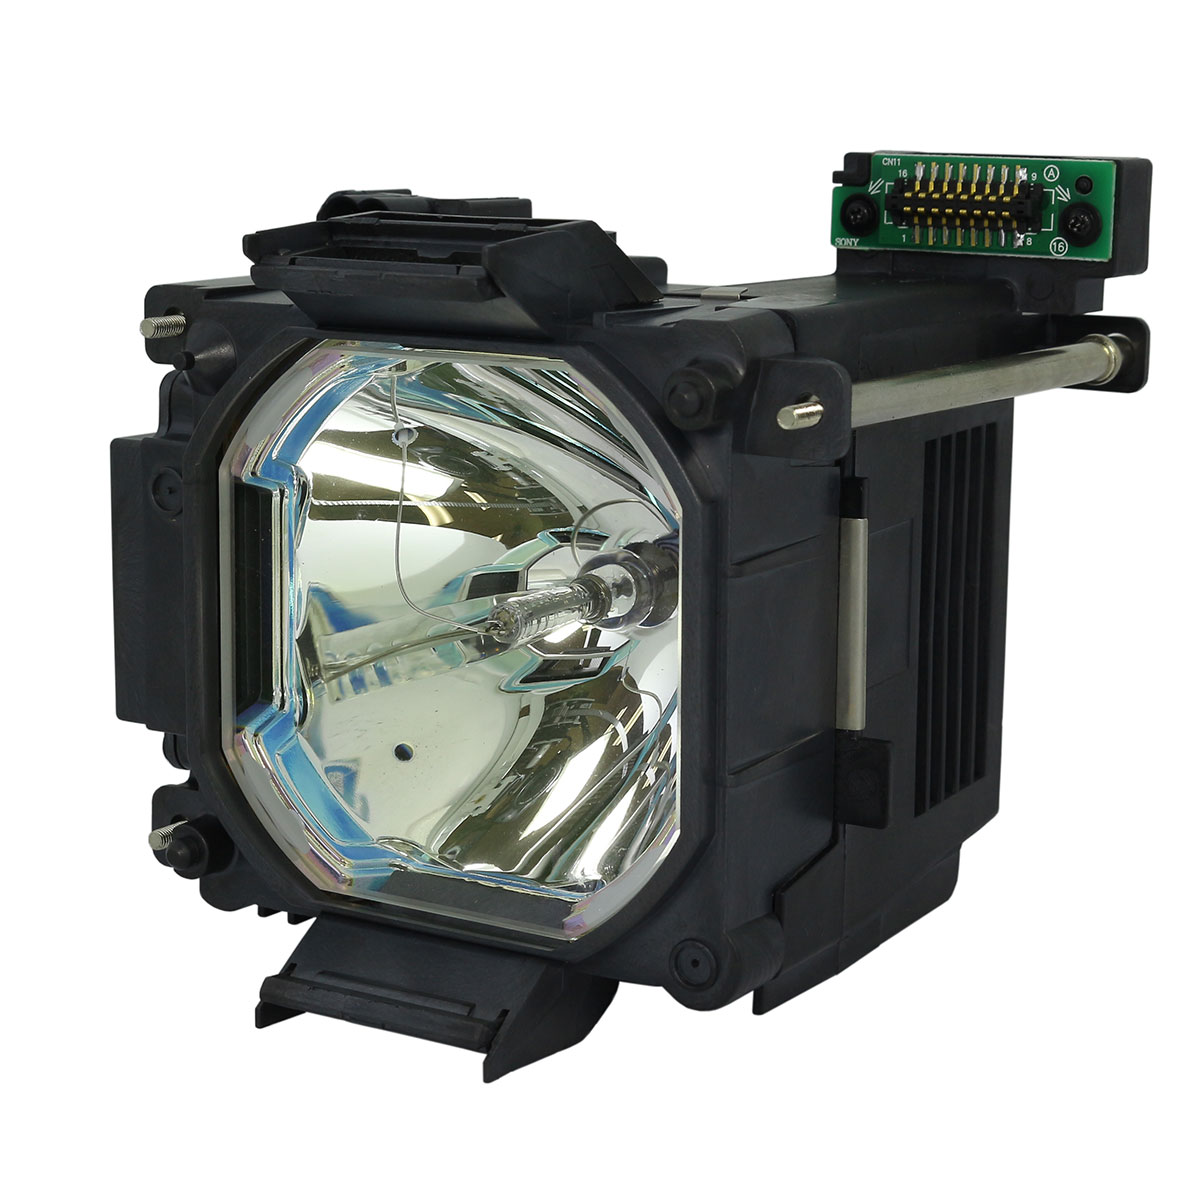 Original Ushio Projector Lamp Replacement with Housing for Sony LMP-F330 - image 1 of 6